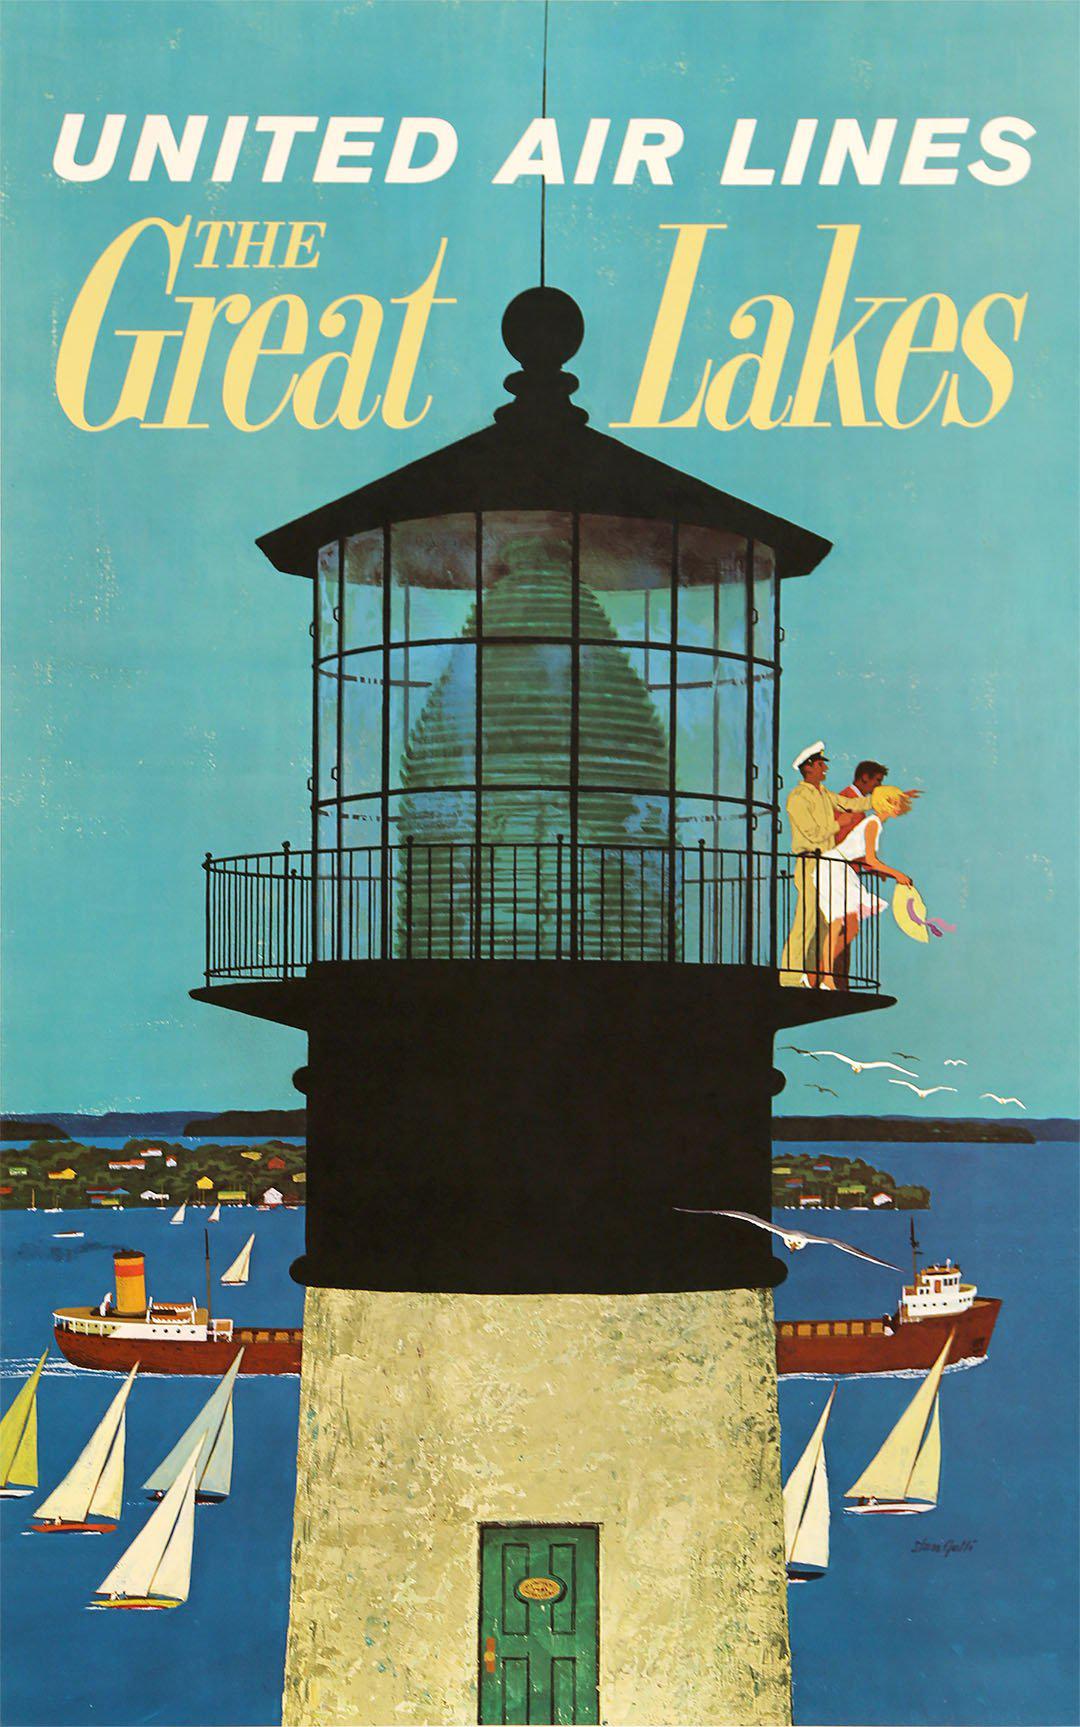 Original Vintage United Air Lines Poster to the Great Lakes by Stan Galli c1960